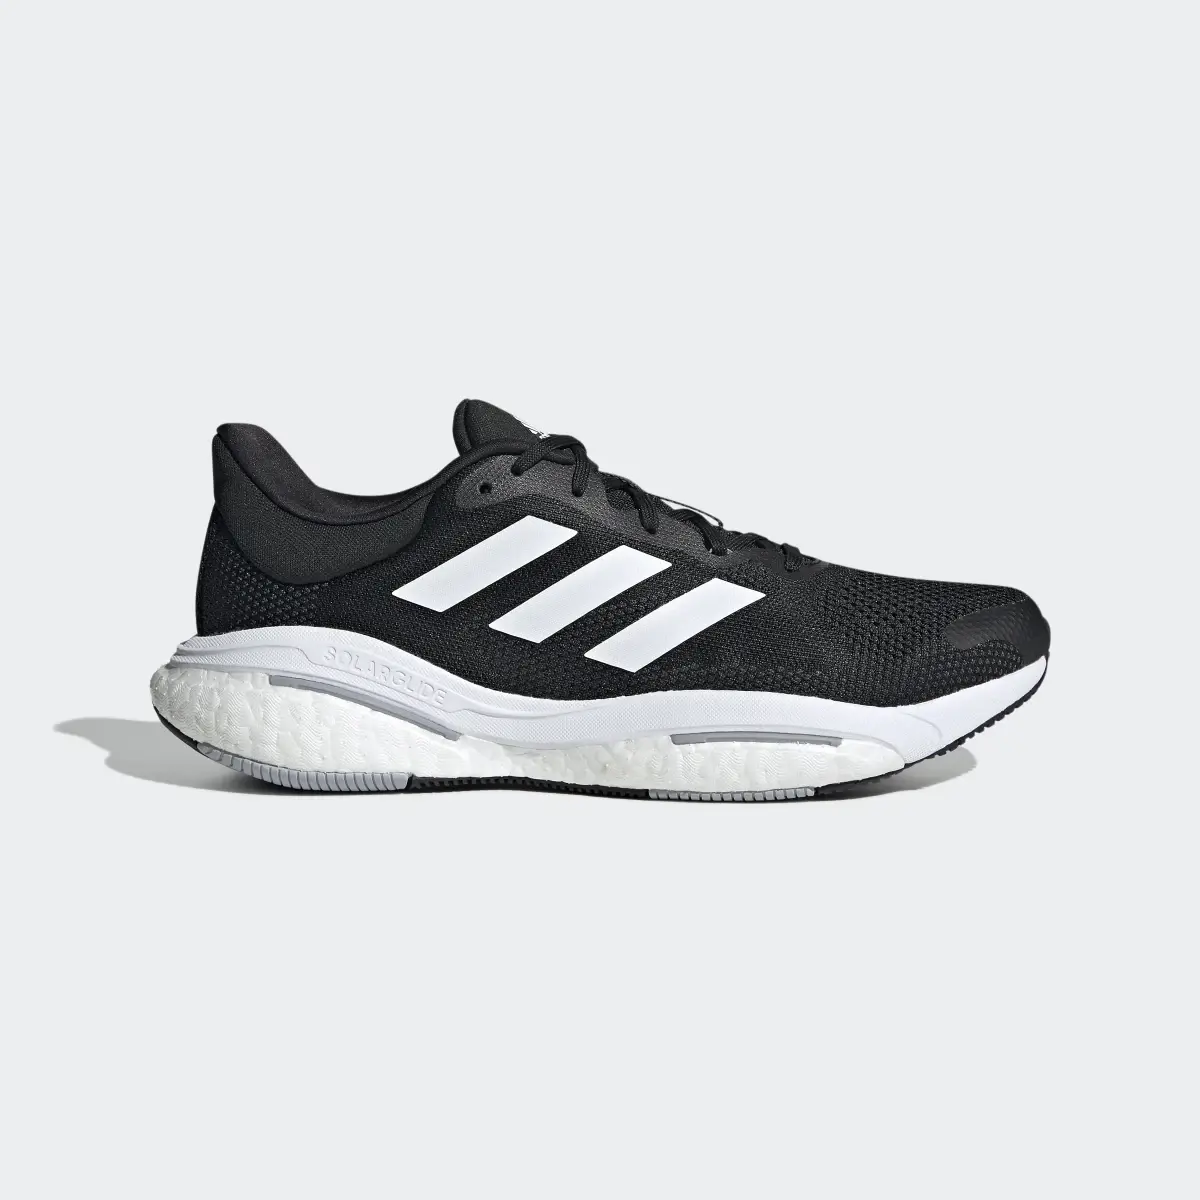 Adidas Solarglide 5 Shoes. 2